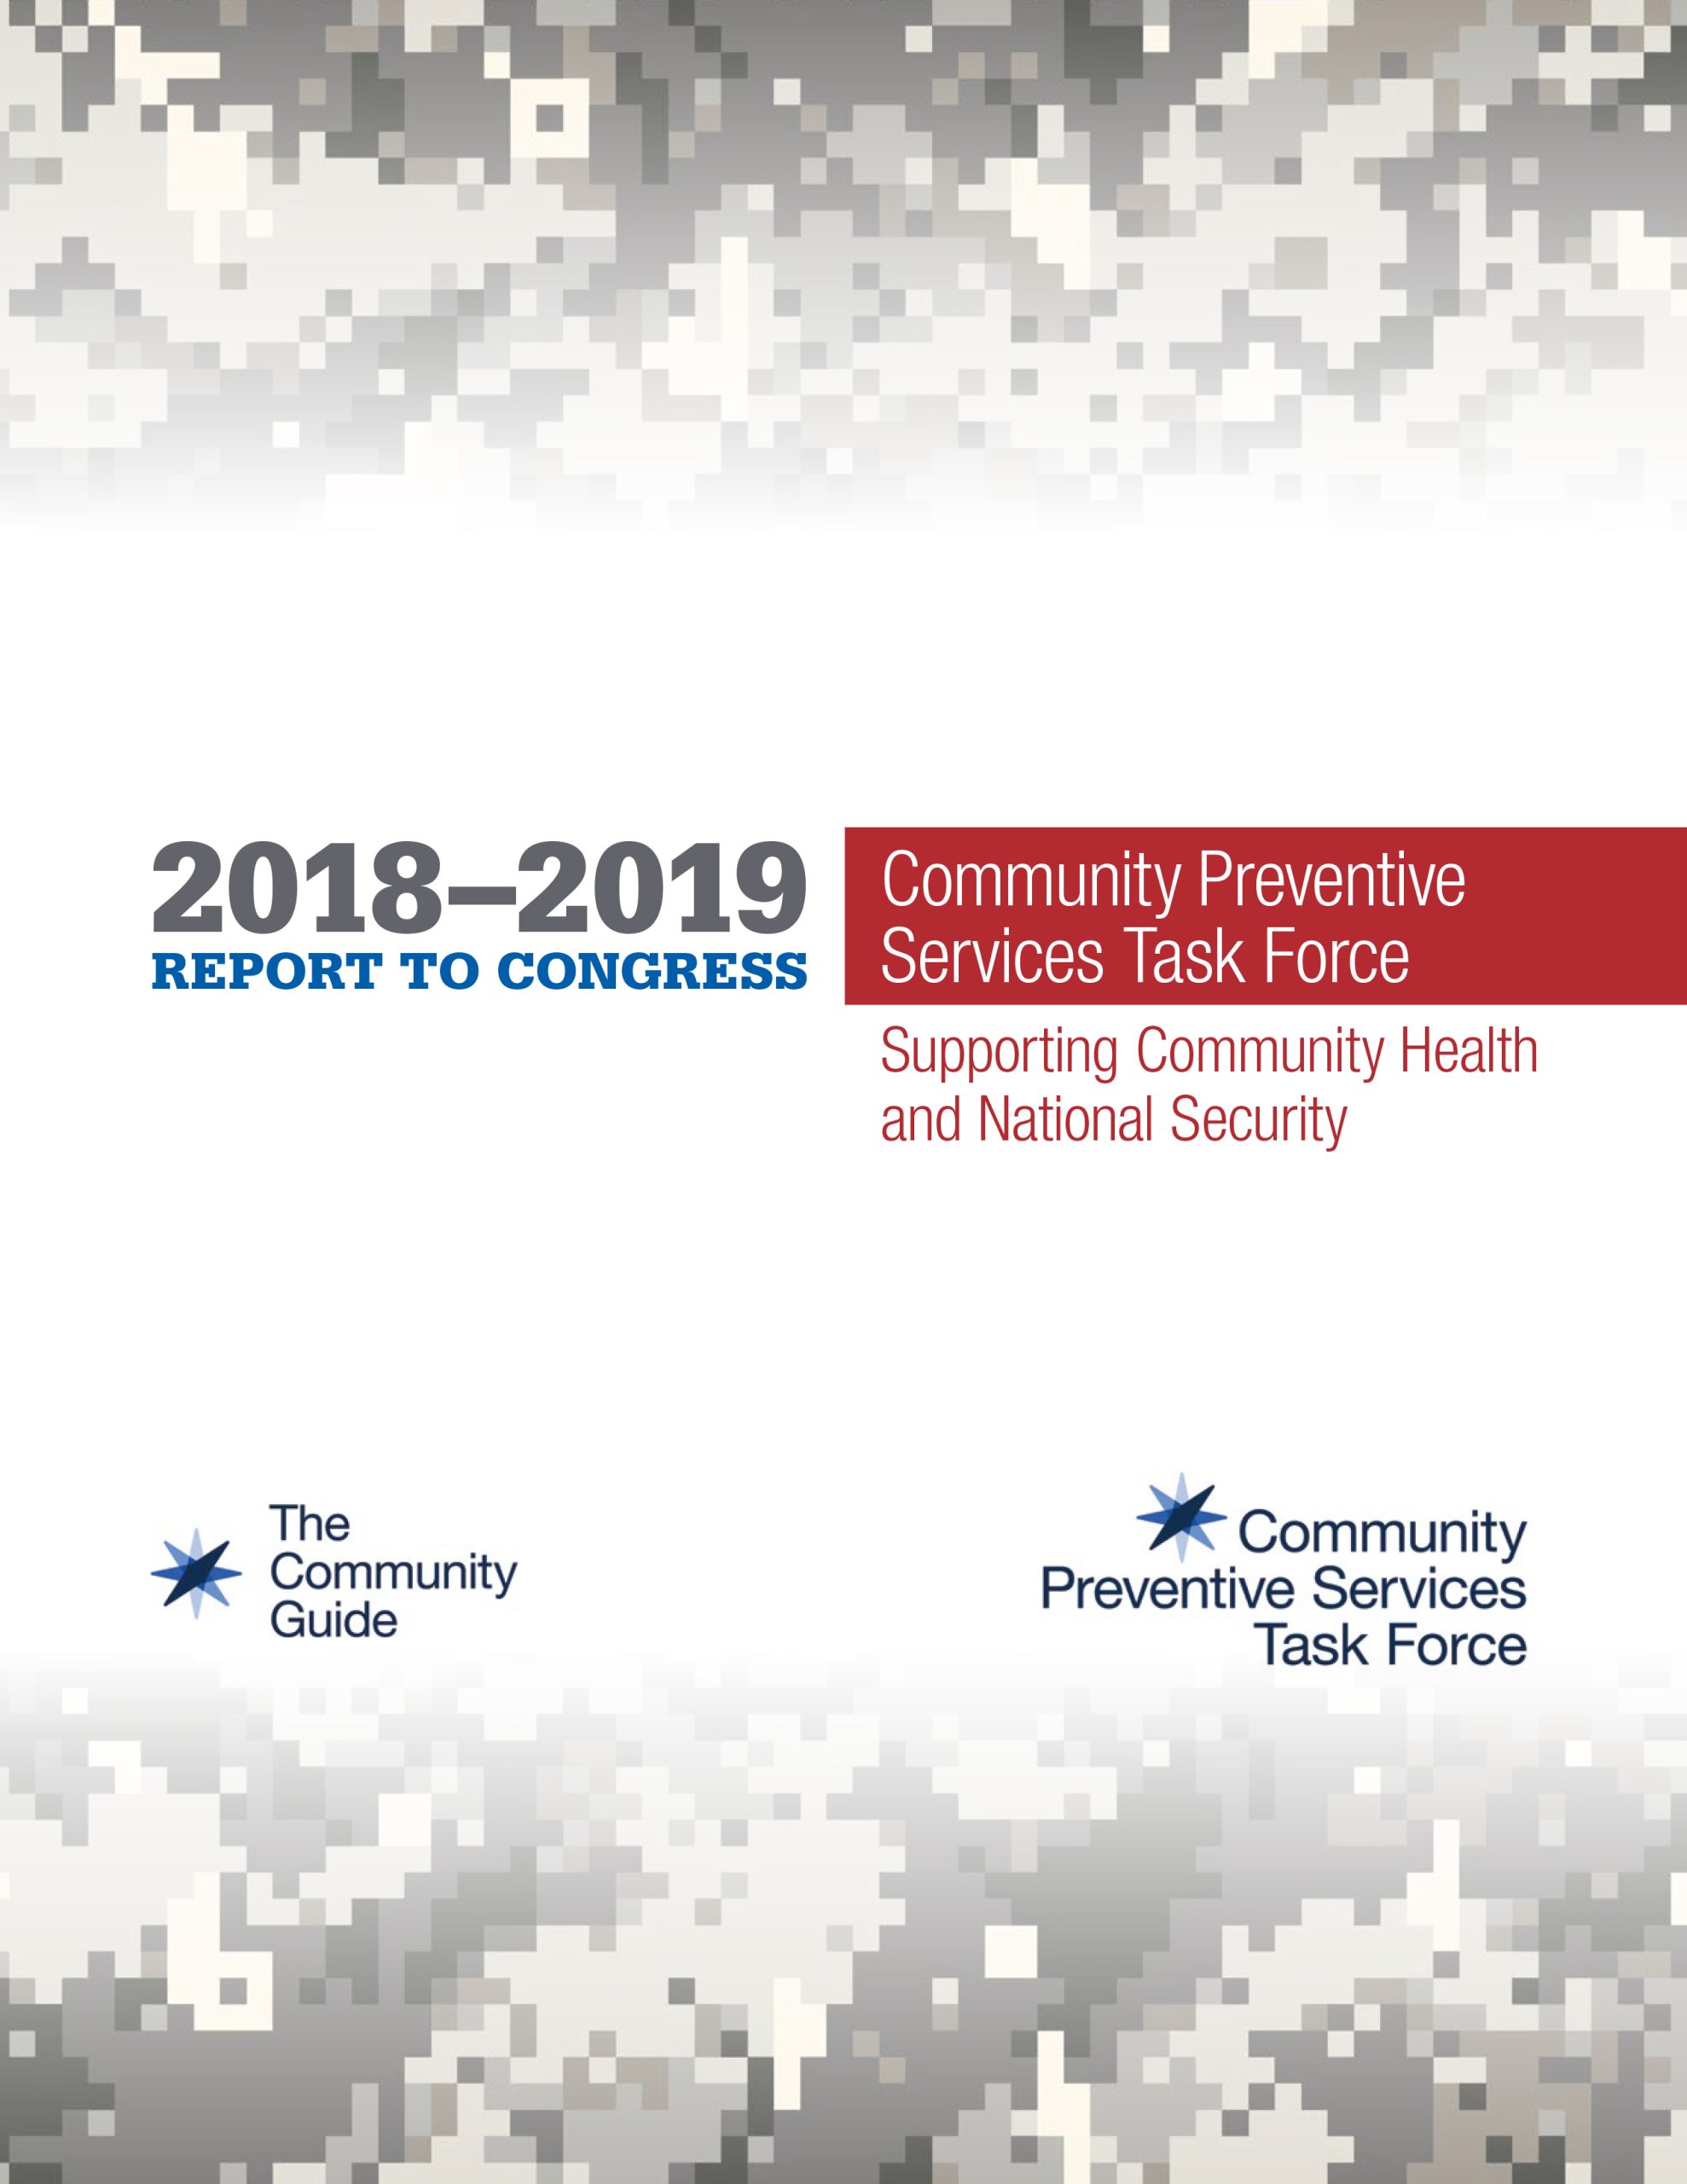 The cover of the 2018-2019 CPSTF Annual Report to Congress